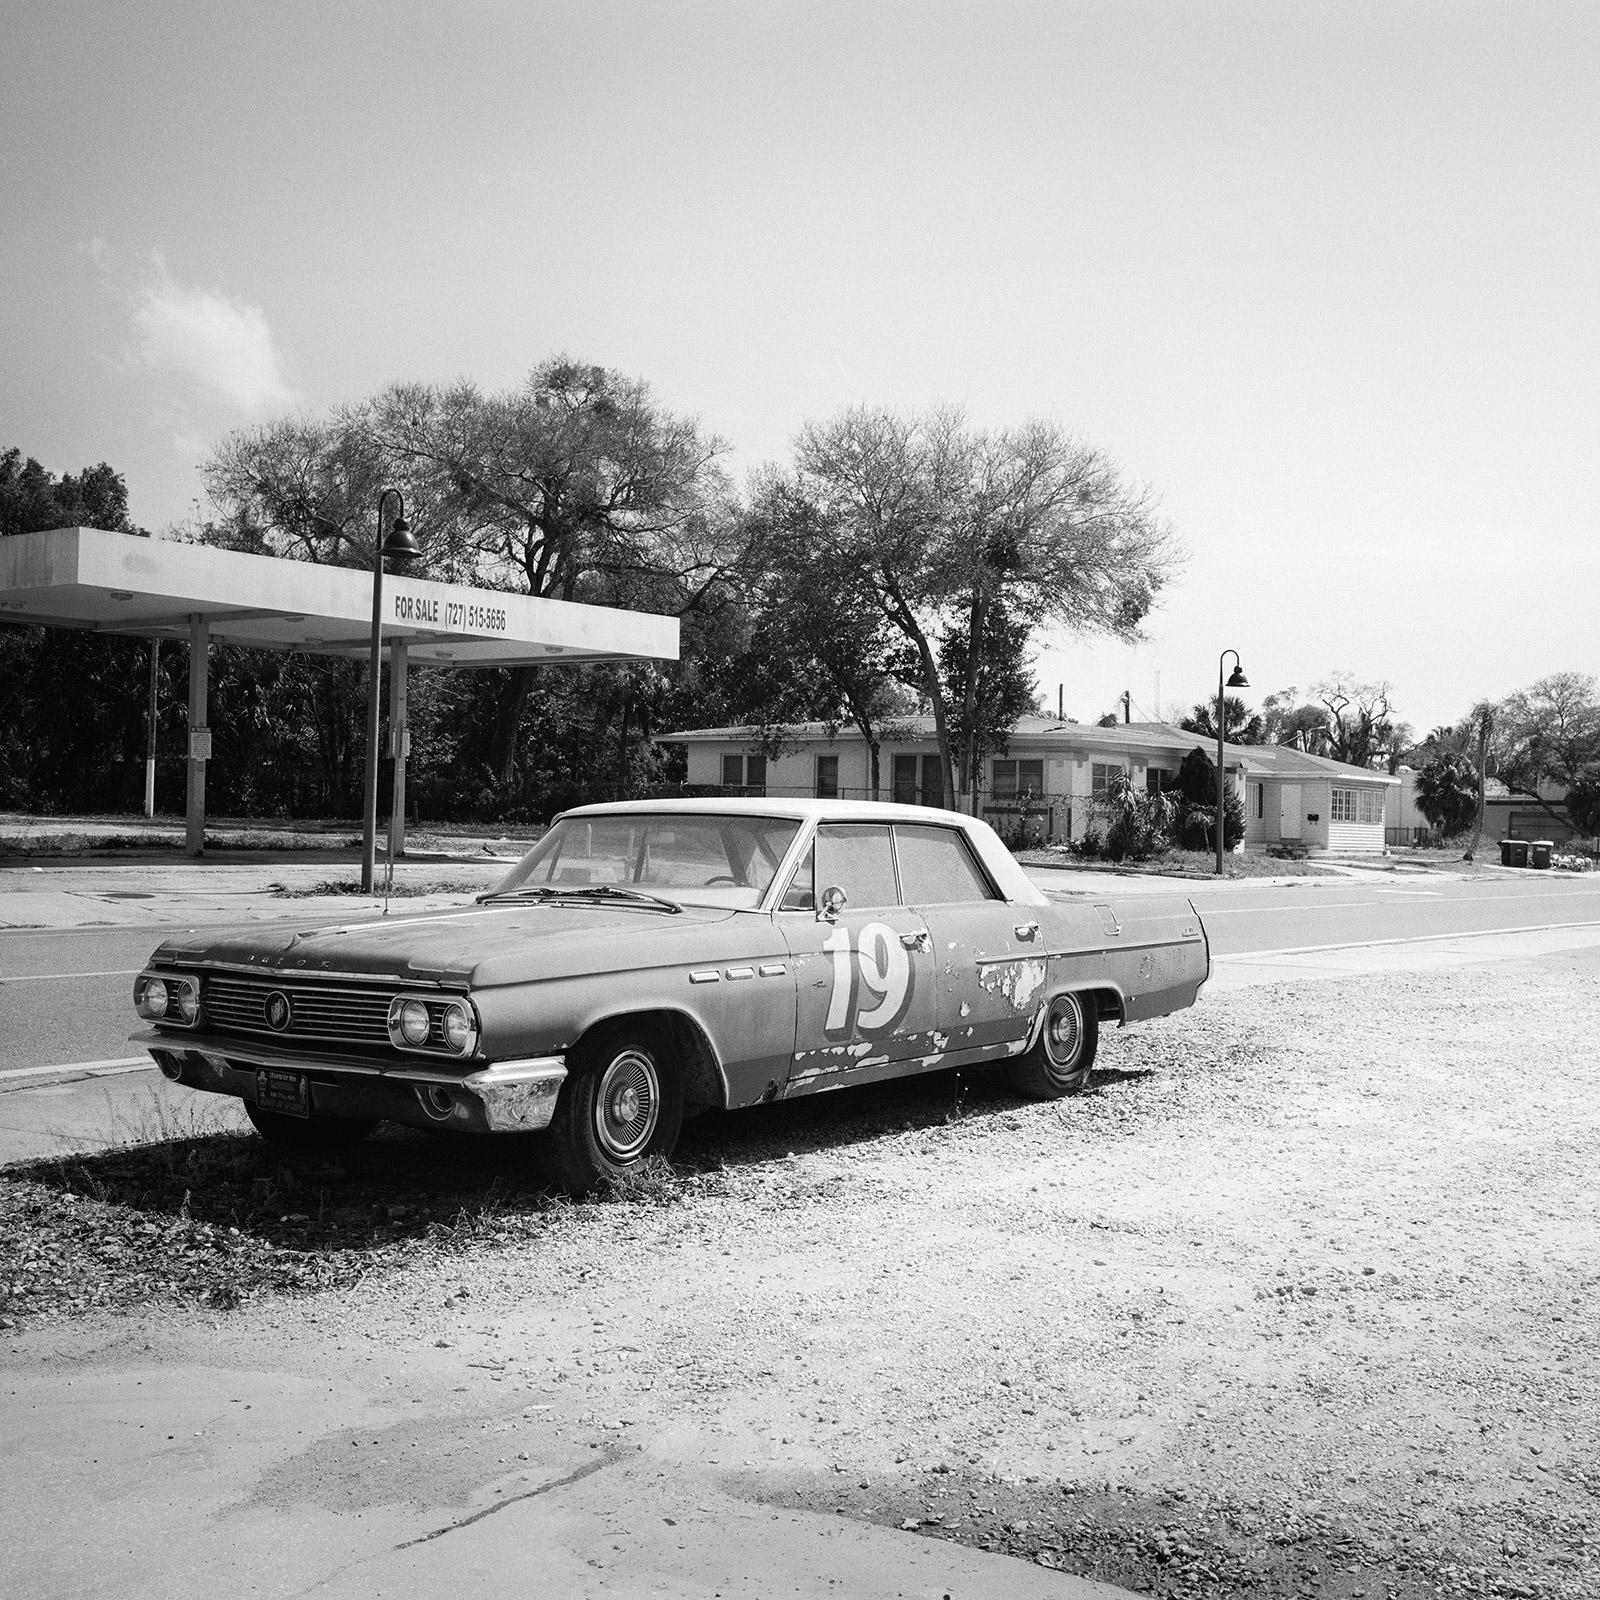 Gerald Berghammer Landscape Photograph - Buick for sale, classic car, Florida, USA, black and white landscape photography